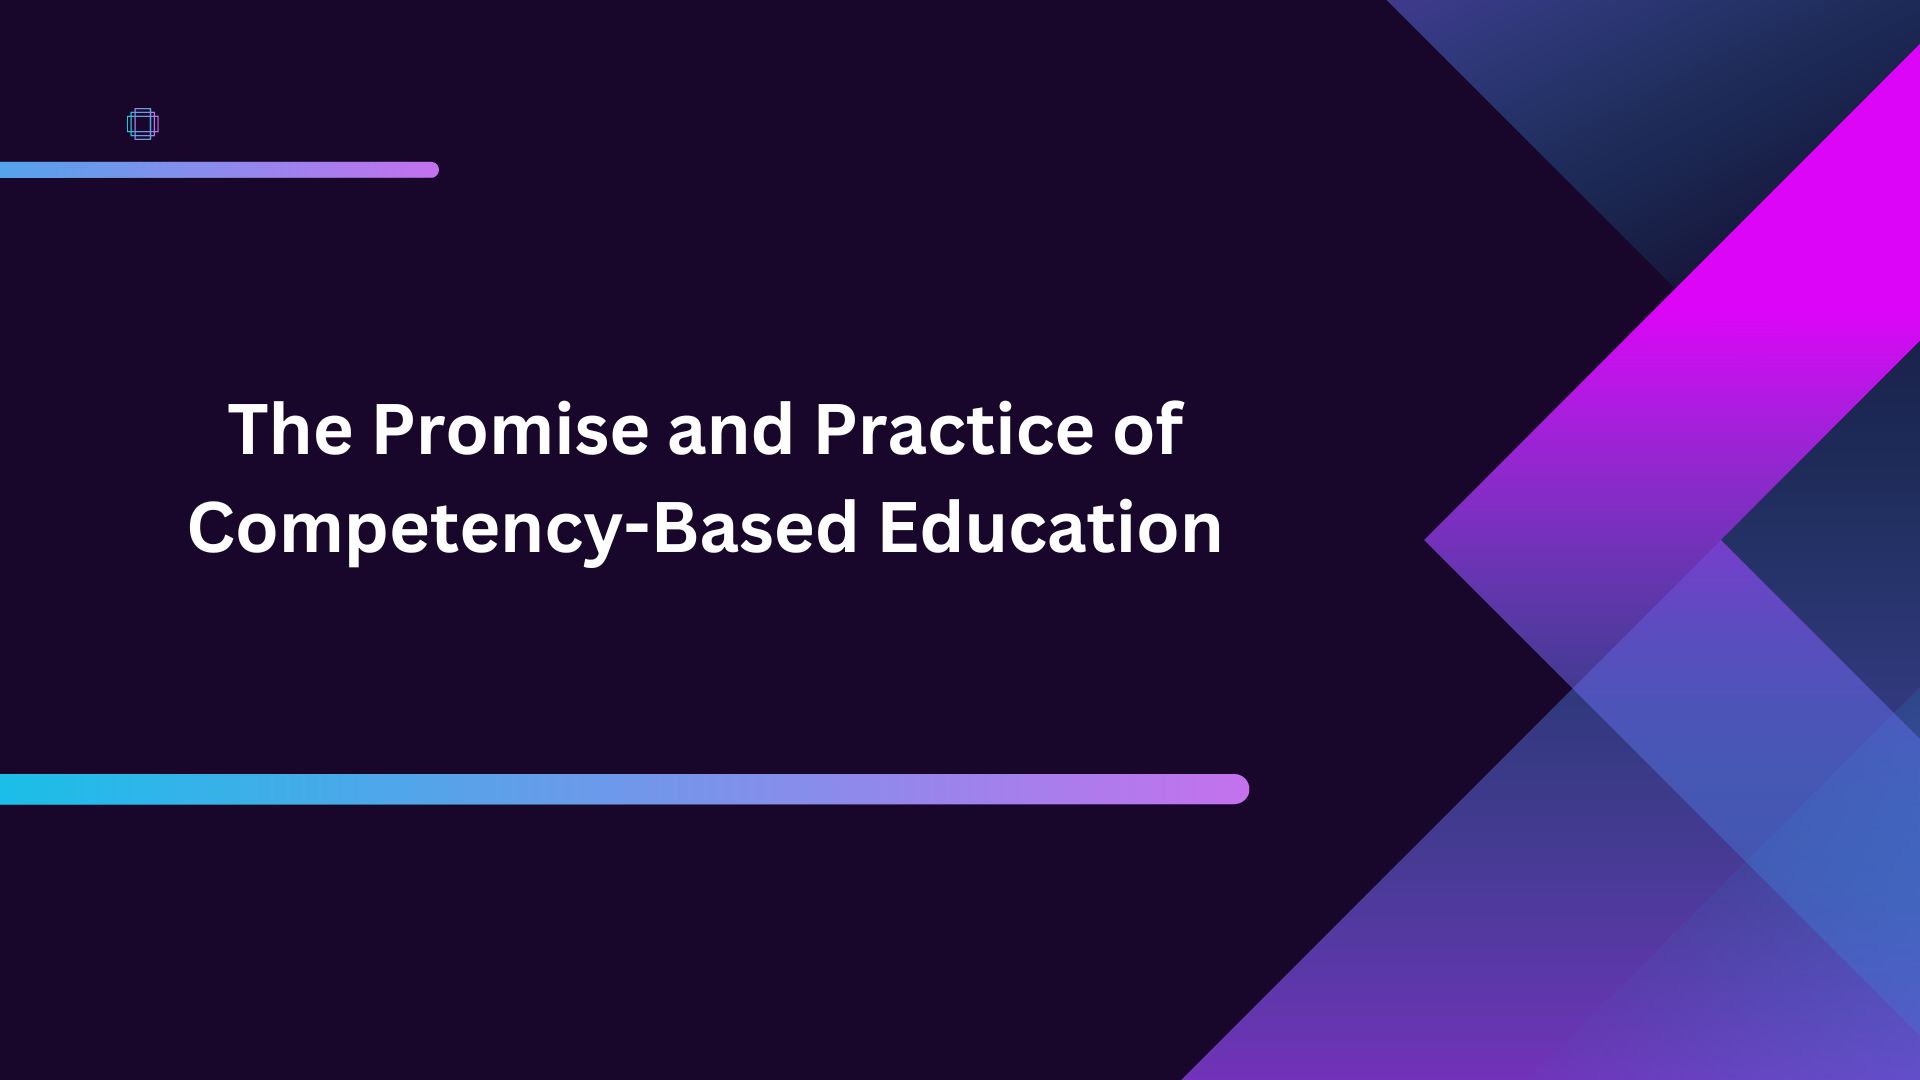 The Promise and Practice of Competency-Based Education